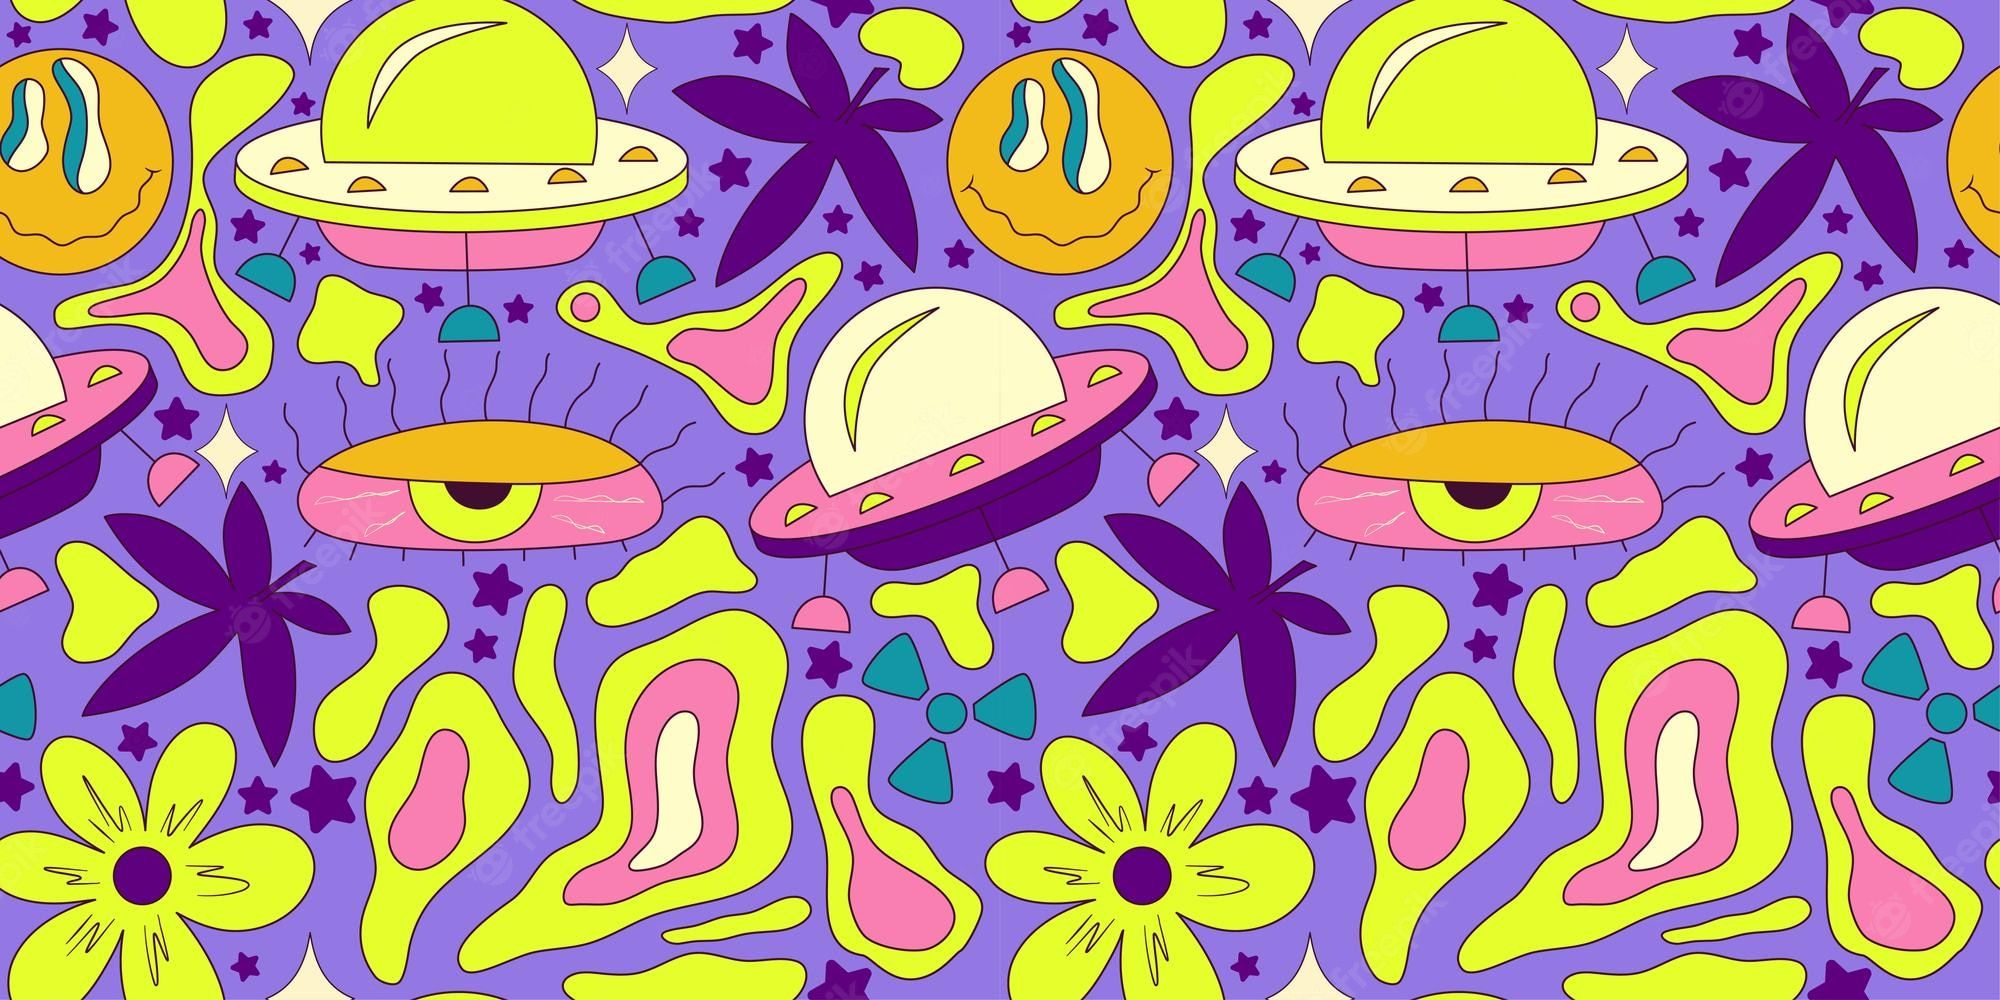 A purple background with yellow and purple illustrations of flowers, planets, and eyes. - Smile